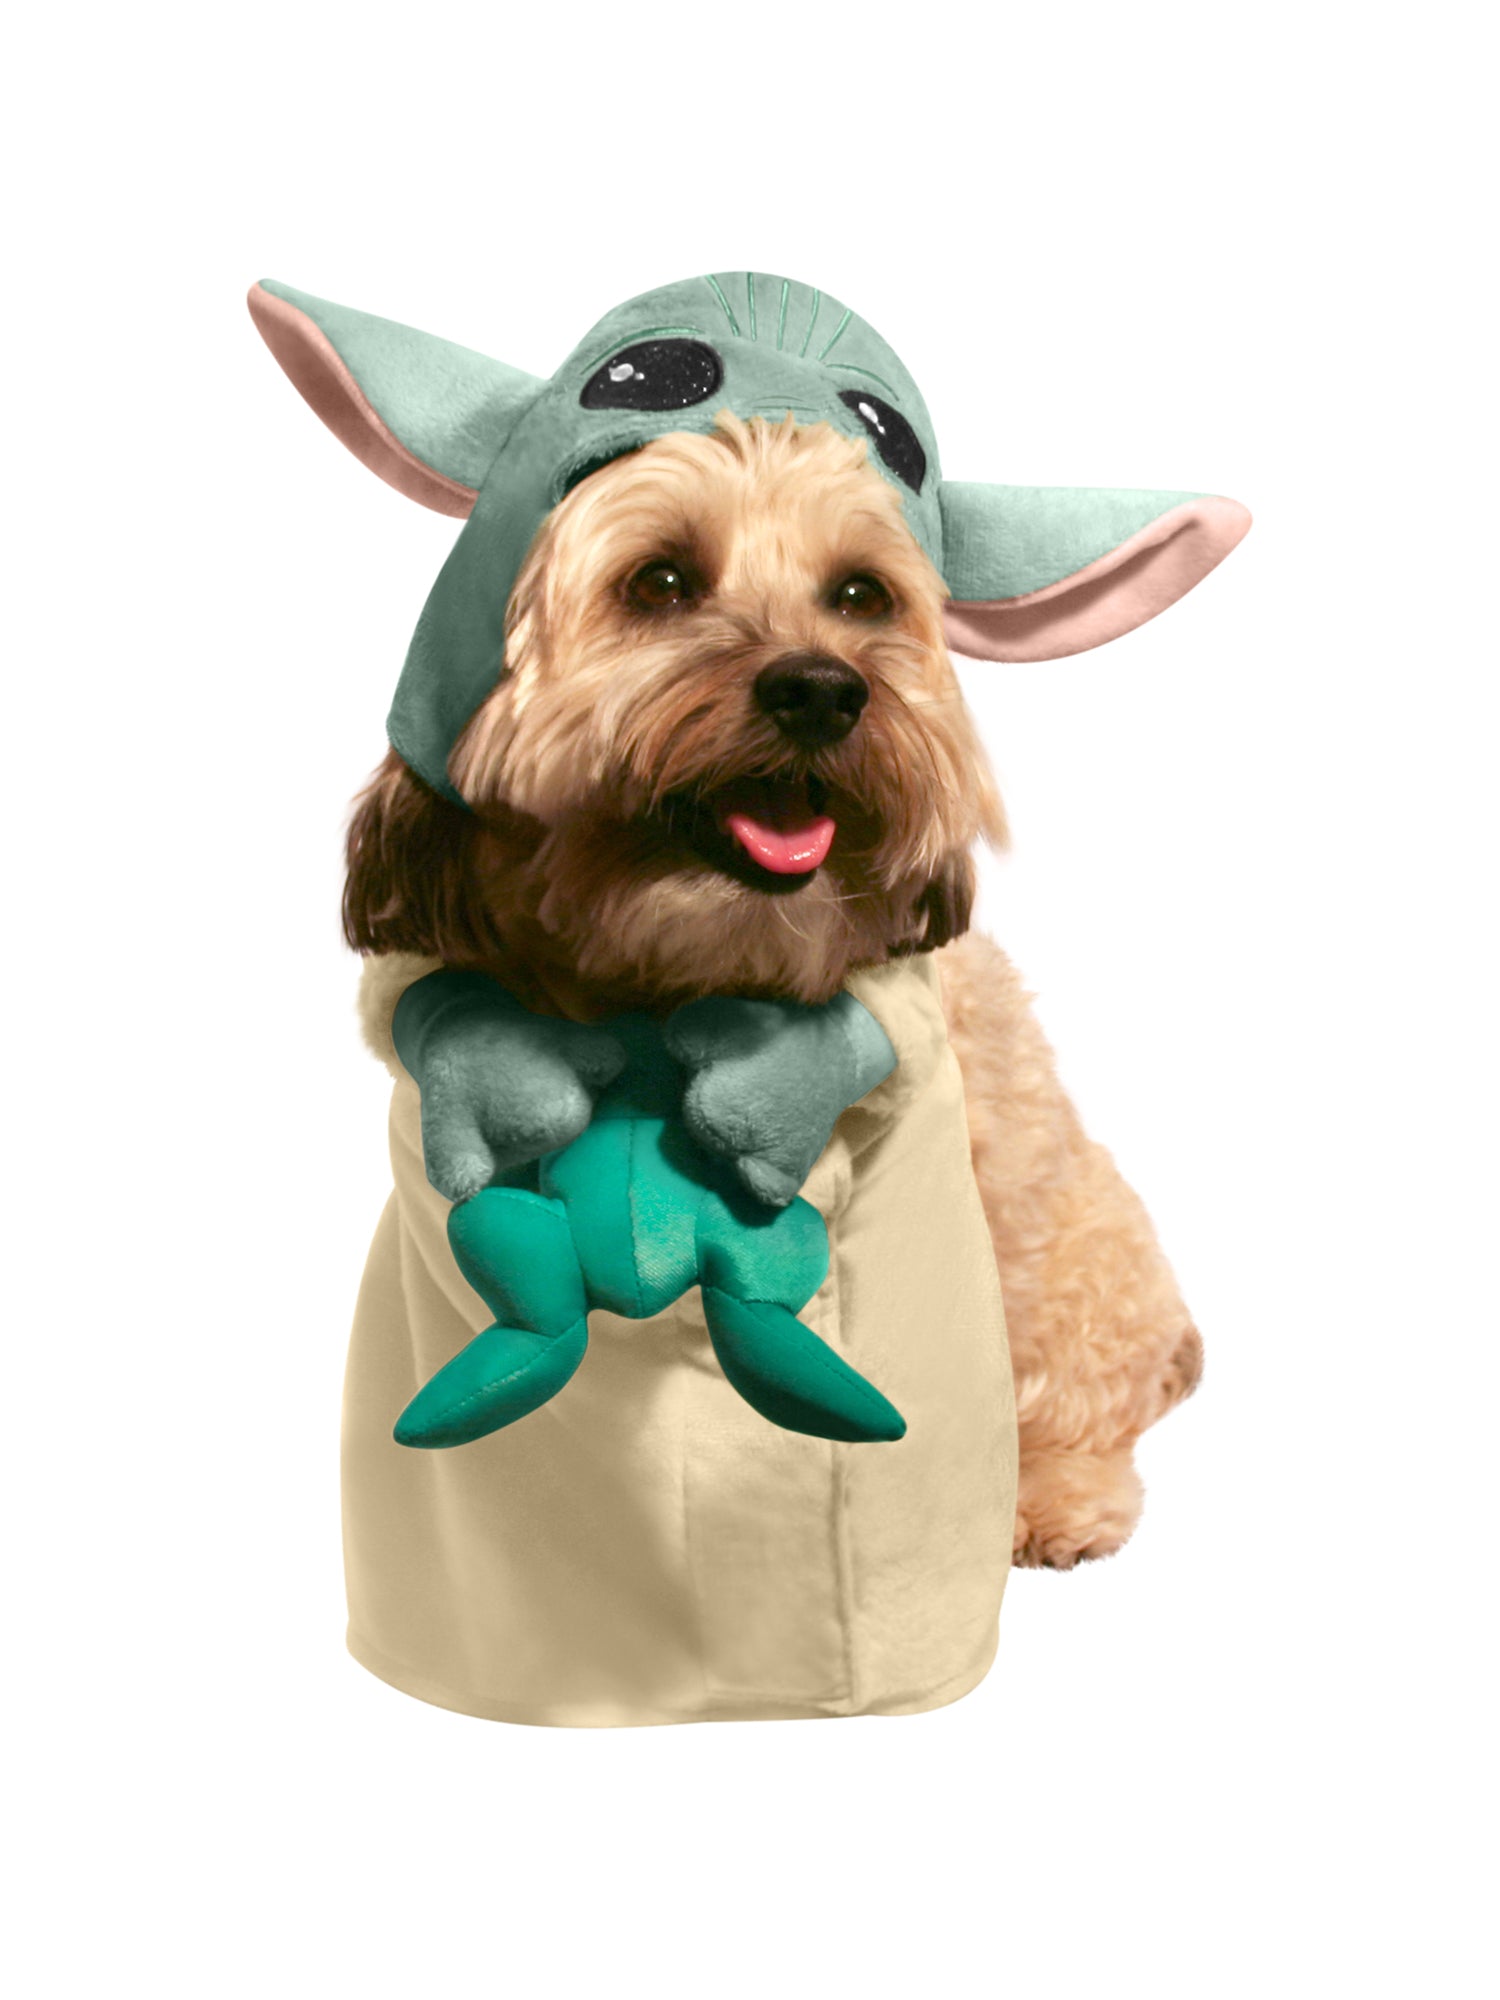 The Child, Mandalorian, The Mandalorian, Mandalorian, Multi, Star Wars, Pet Costume, Small, Front